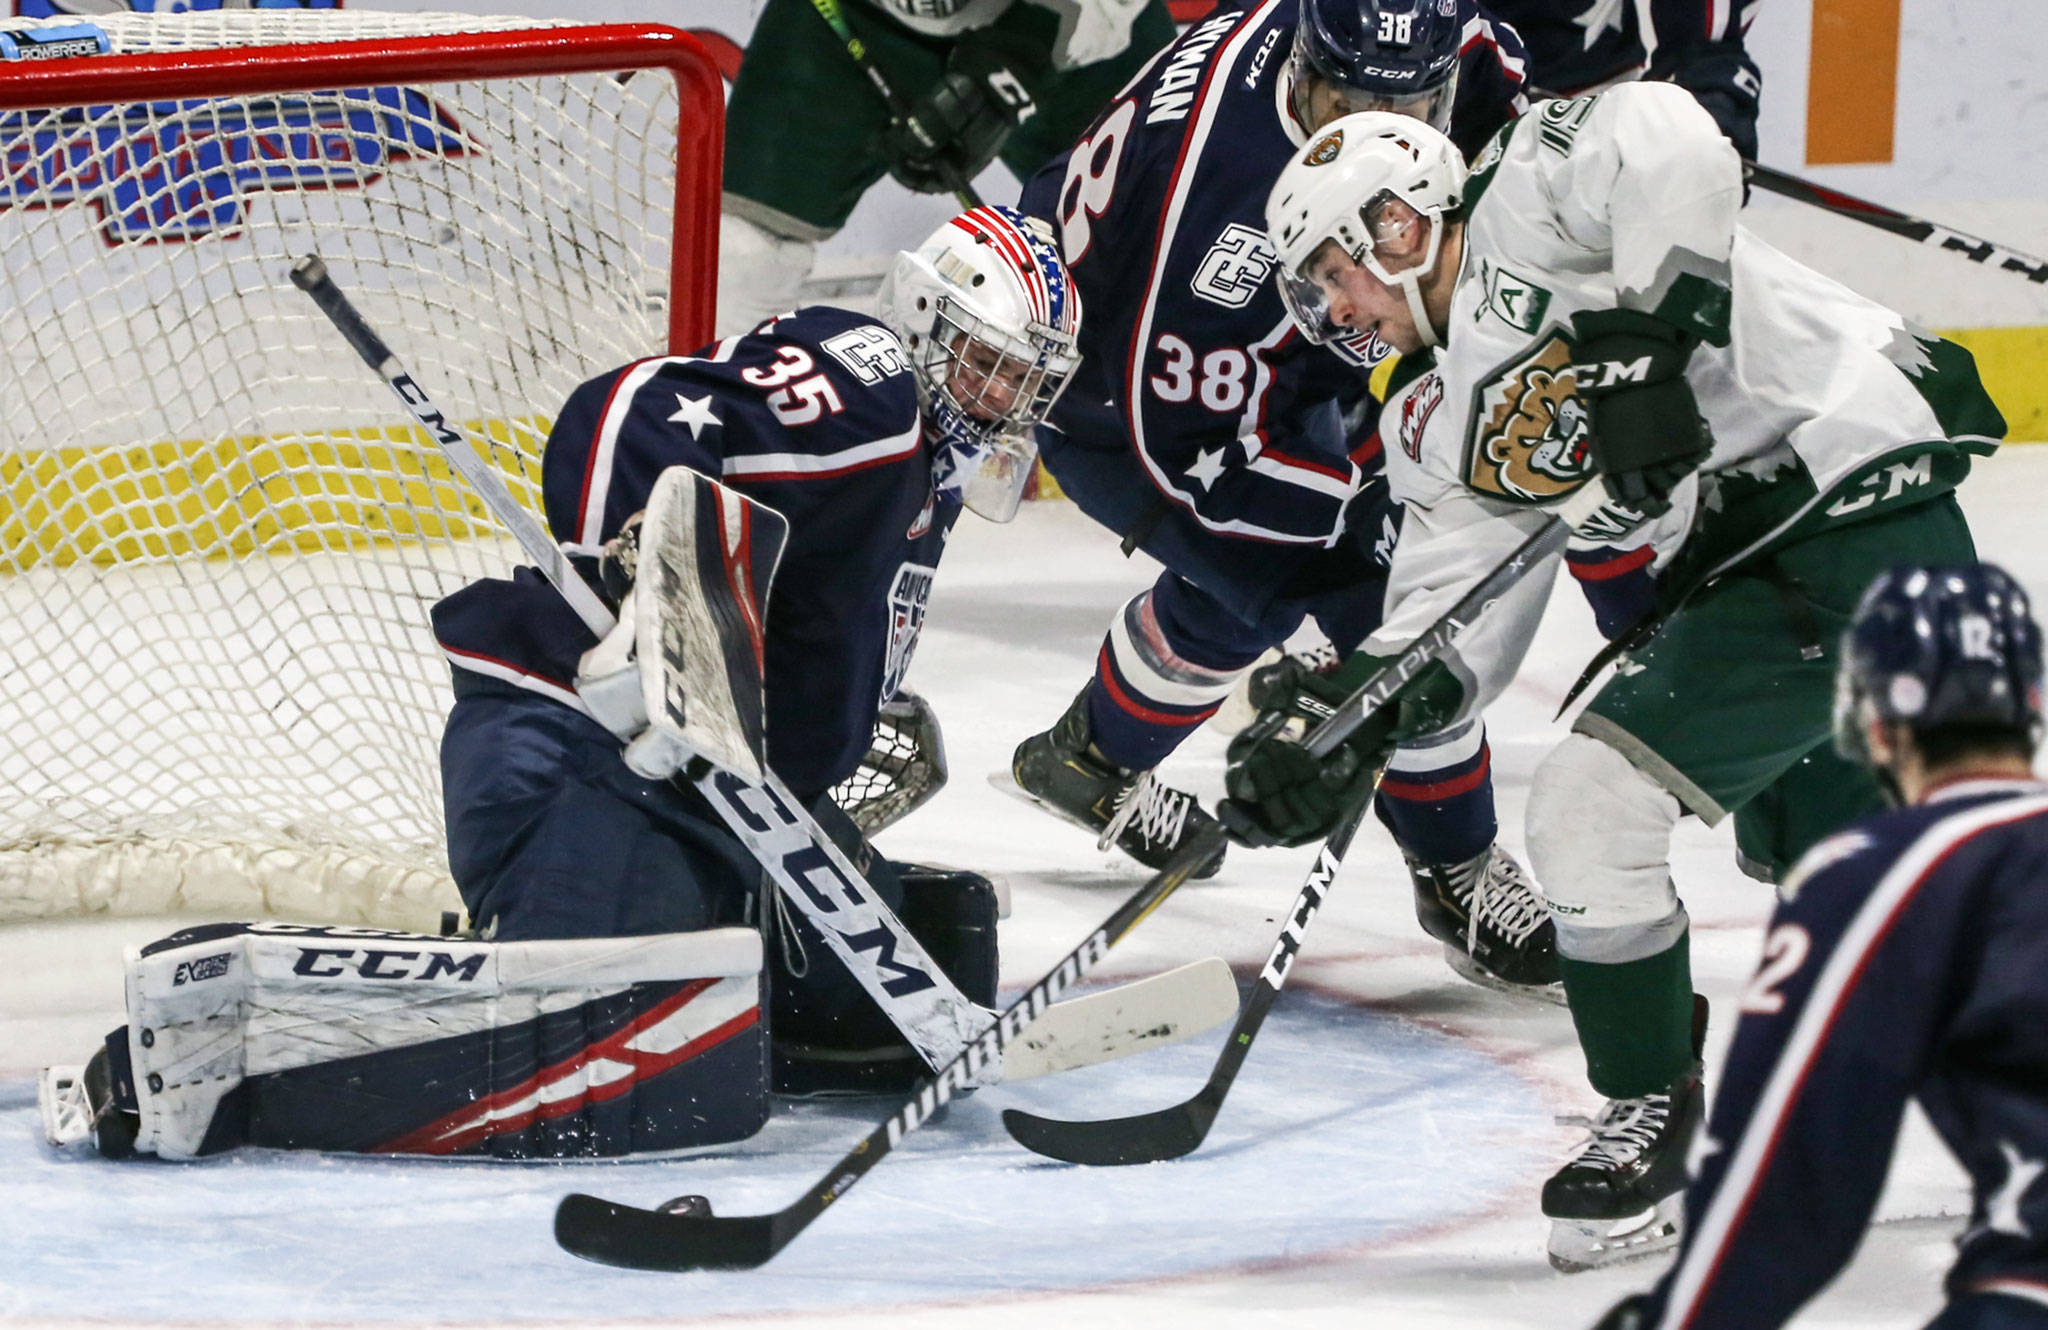 Everett’s Bryce Kindopp scores a goal past Tri-City’s Beck Warm during the first period of Game 5 of the Silvertips’ first-round playoff series against the Americans on March 30 at Angel of the Winds Arena in Everett. (Kevin Clark / The Herald)